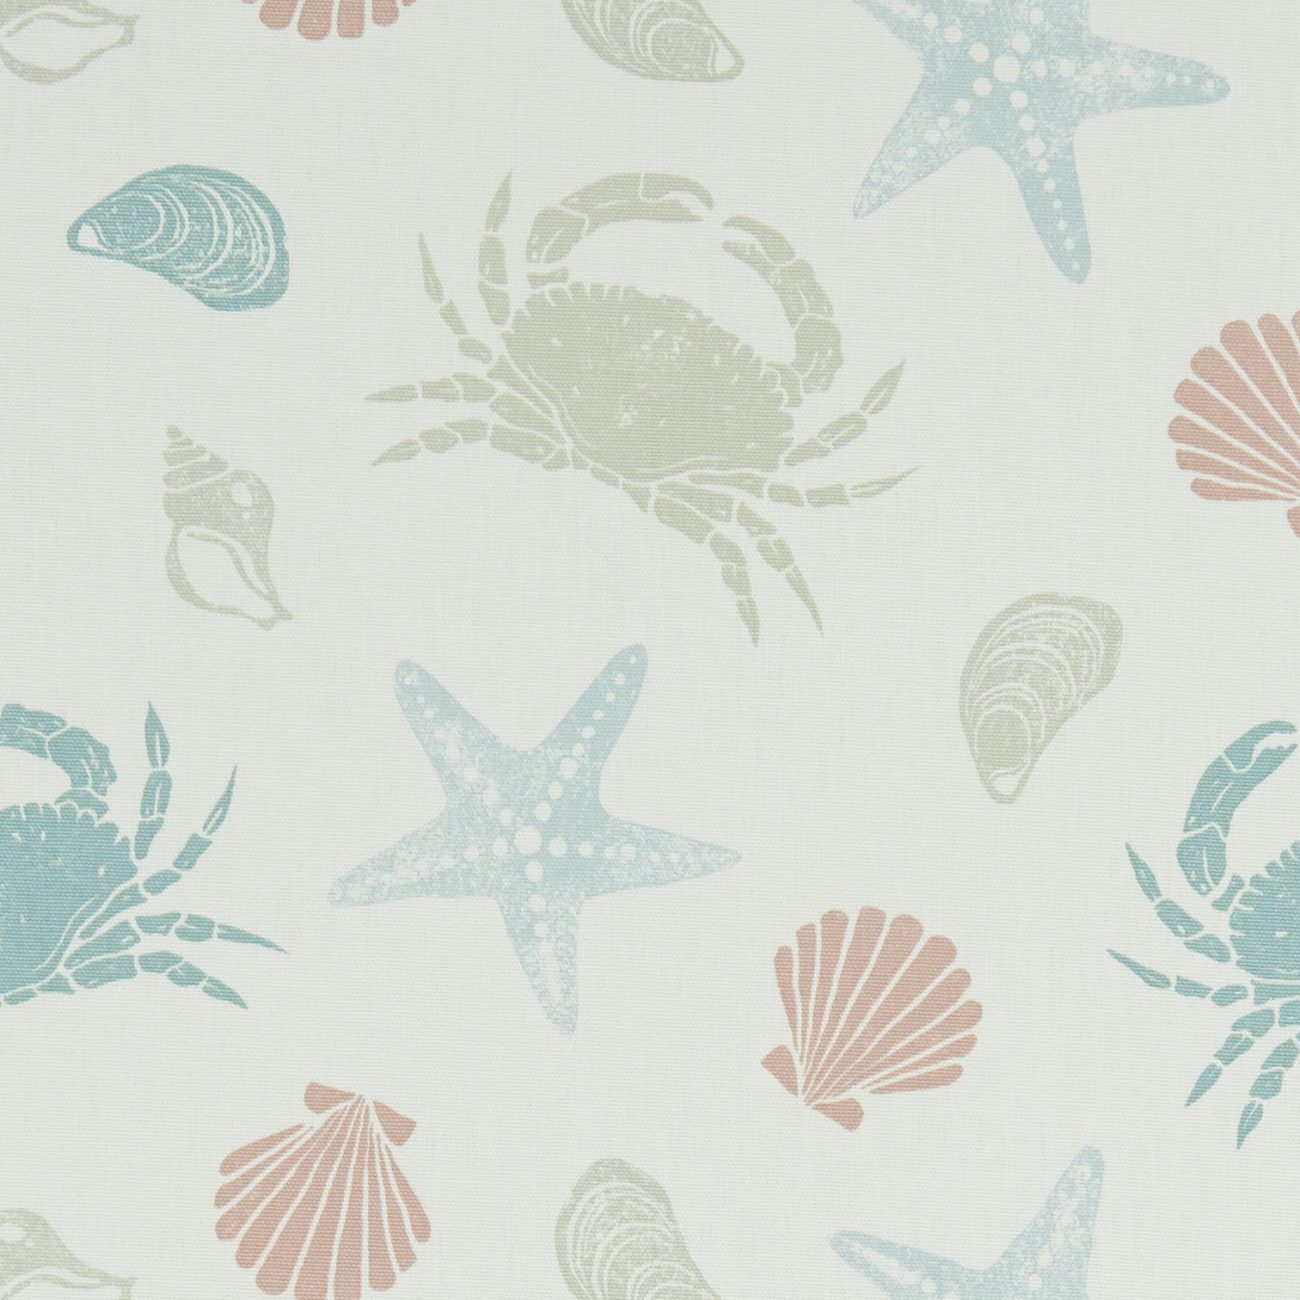 Offshore Pastel Fabric by Studio G